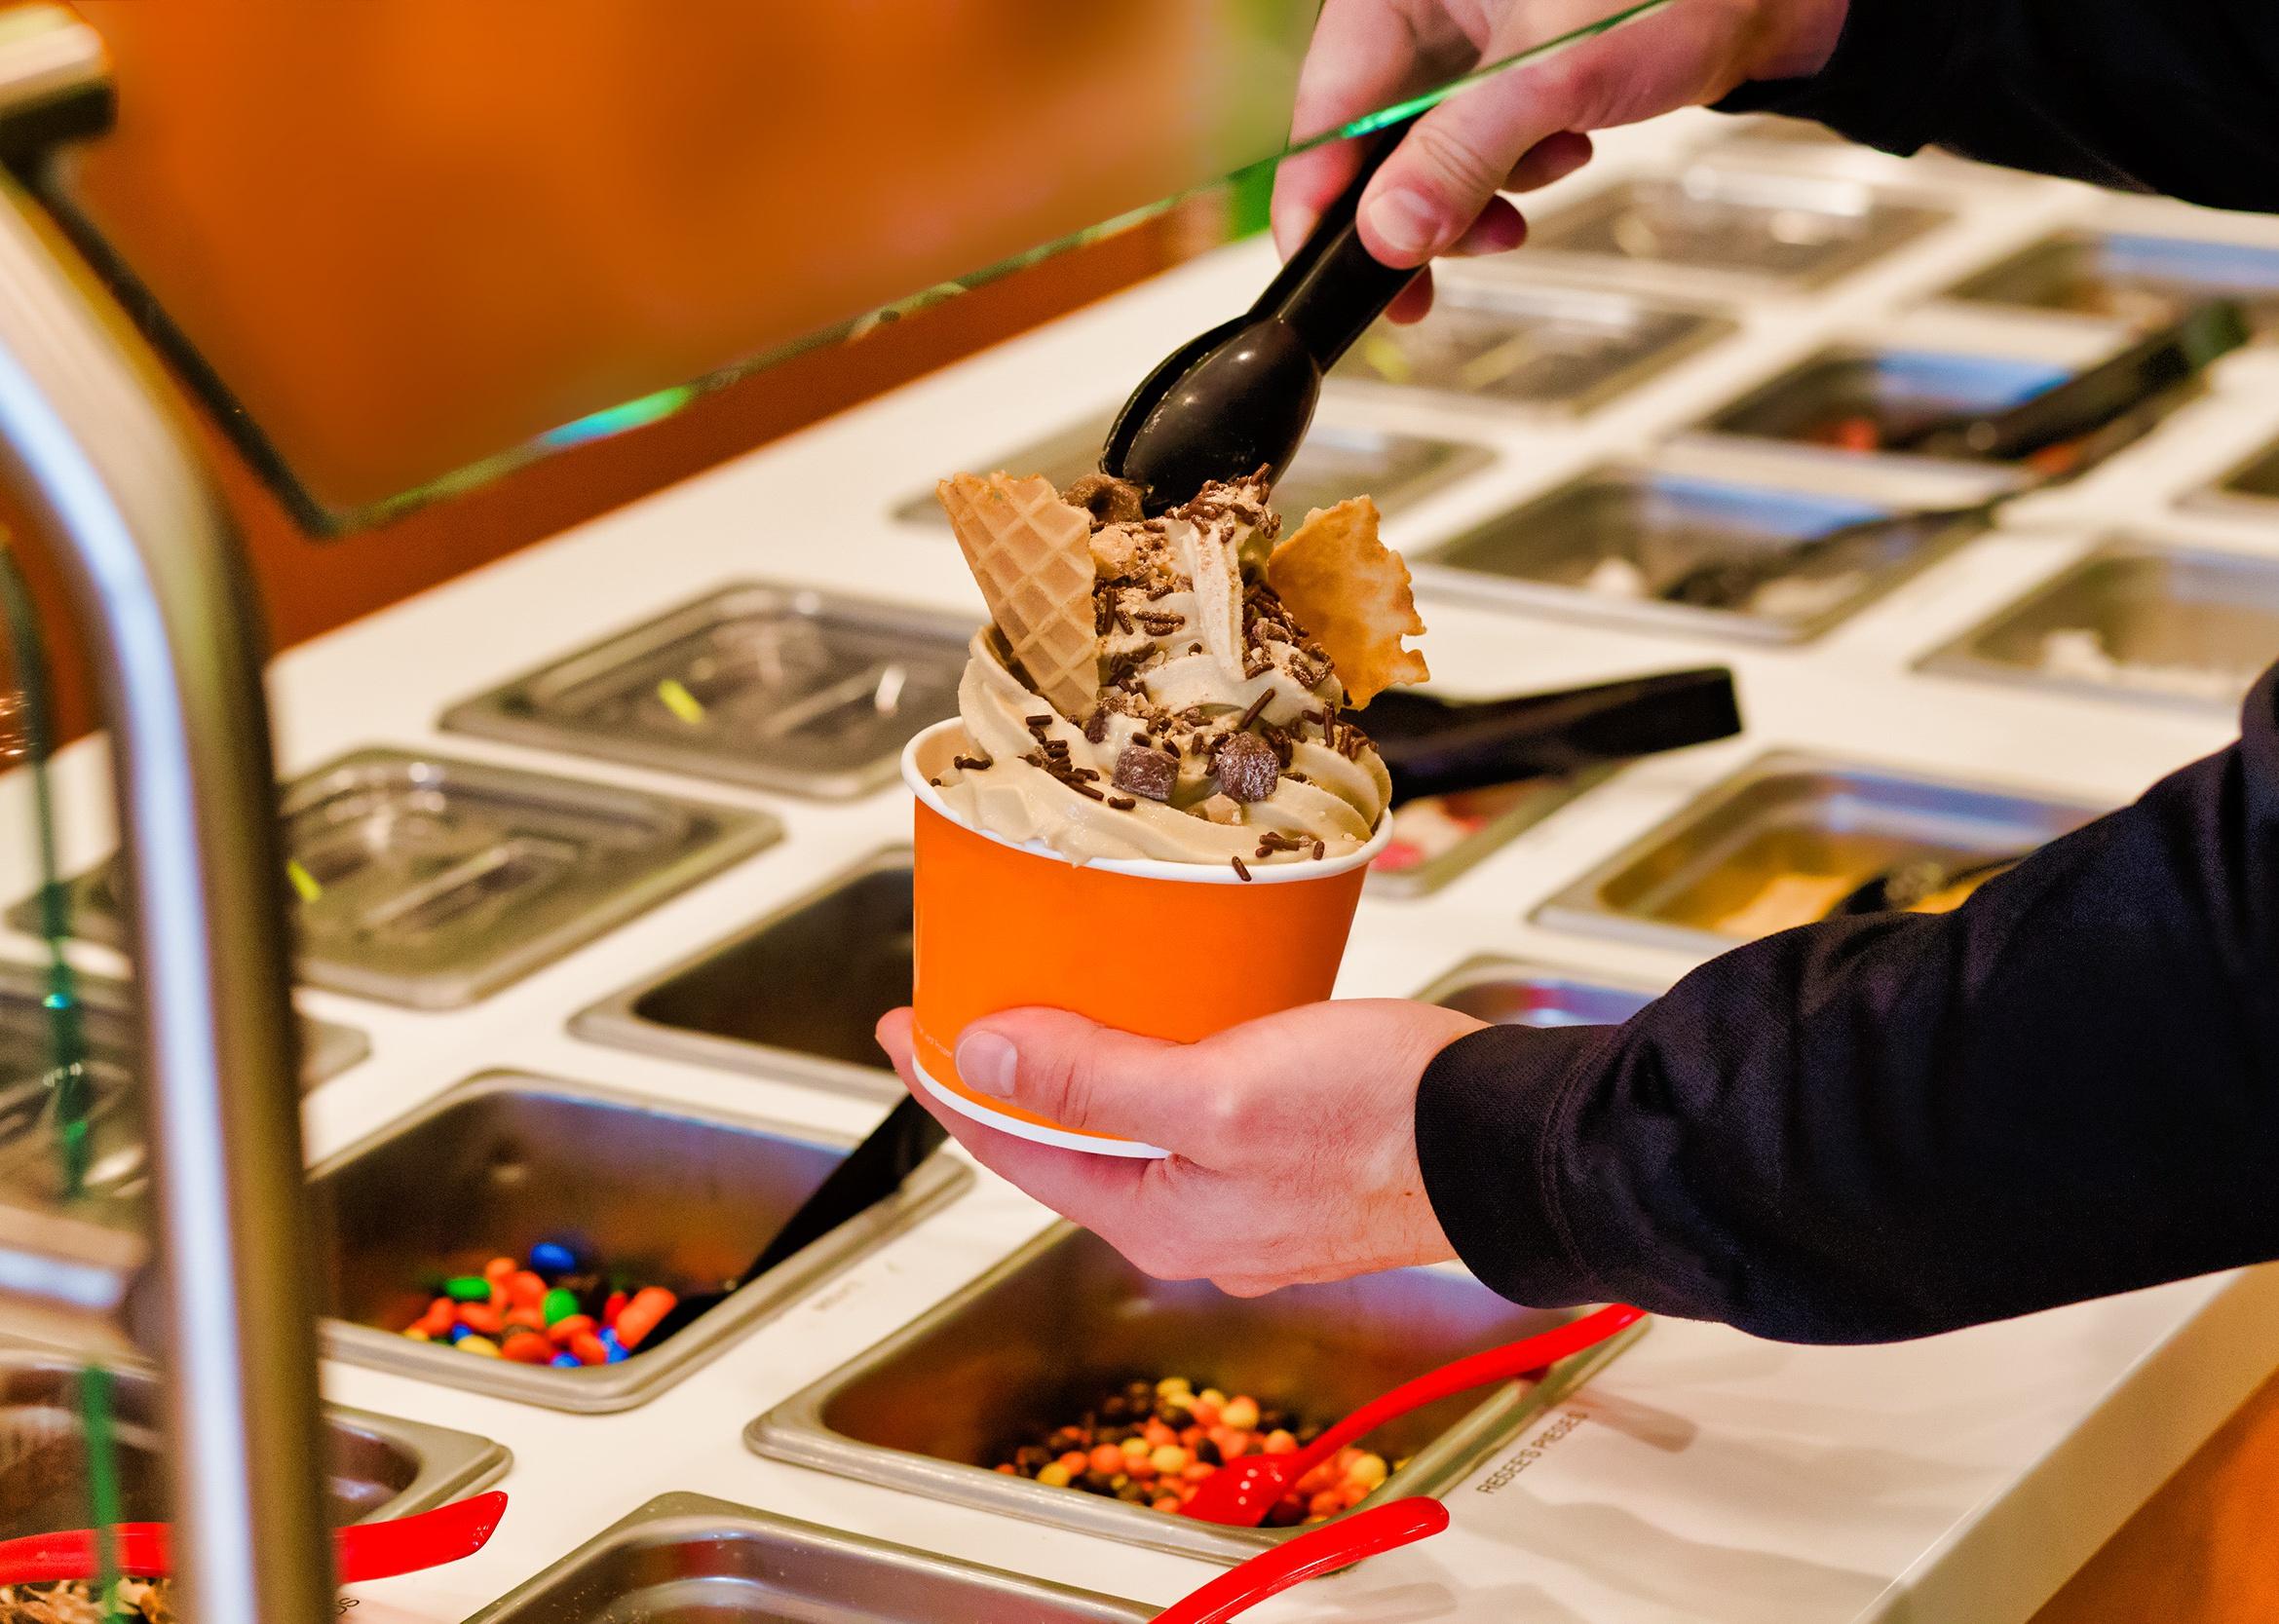 Hand building frozen yogurt with chocolate chips and sprinkles at a buffet.